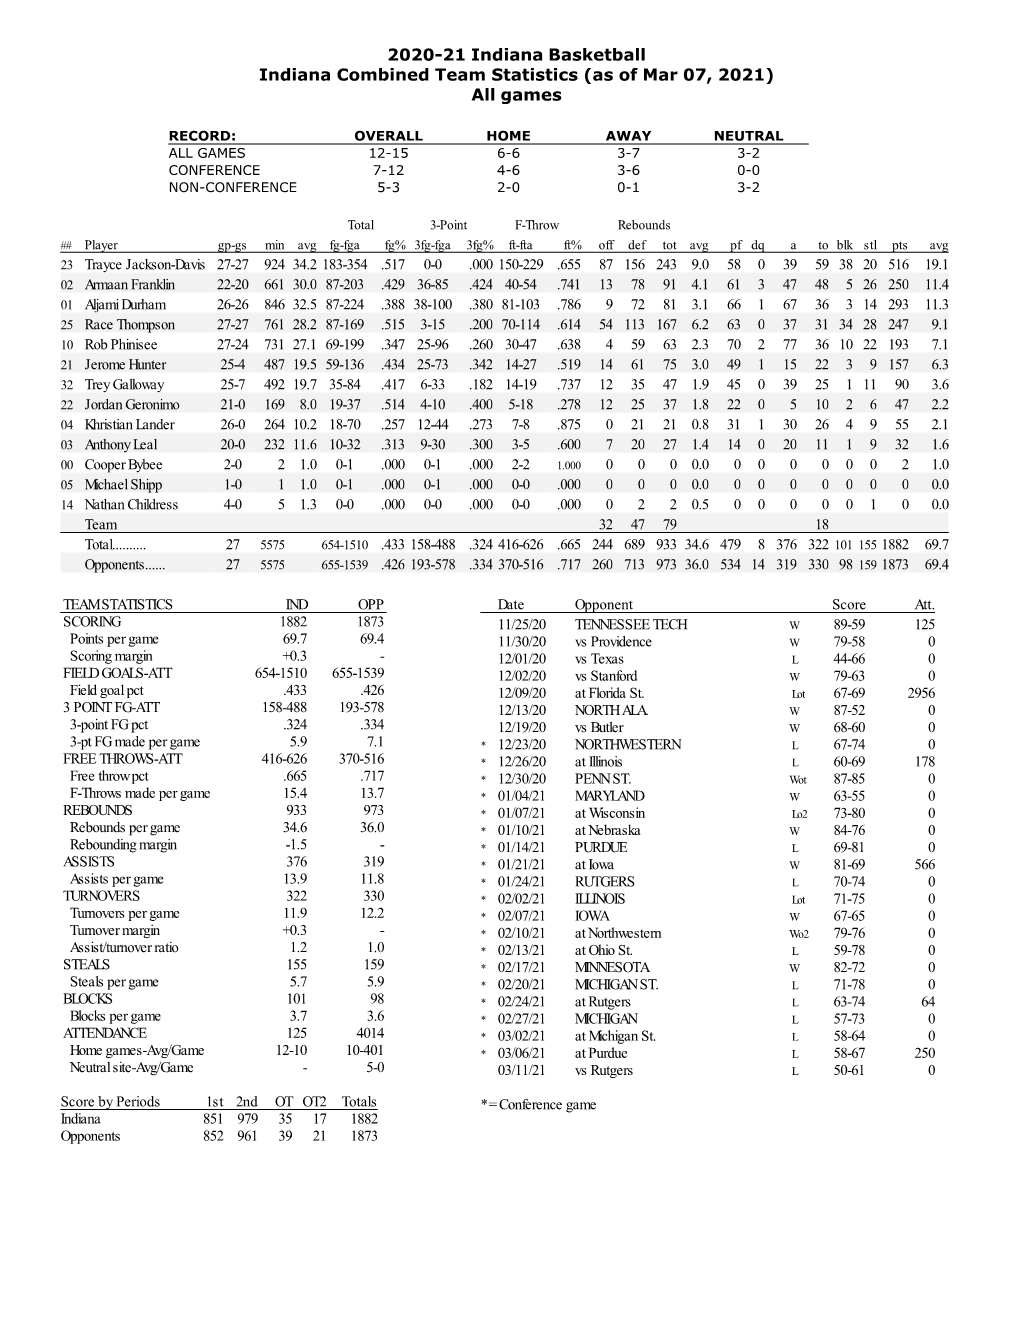 2020-21 Indiana Basketball Indiana Combined Team Statistics (As of Mar 07, 2021) All Games